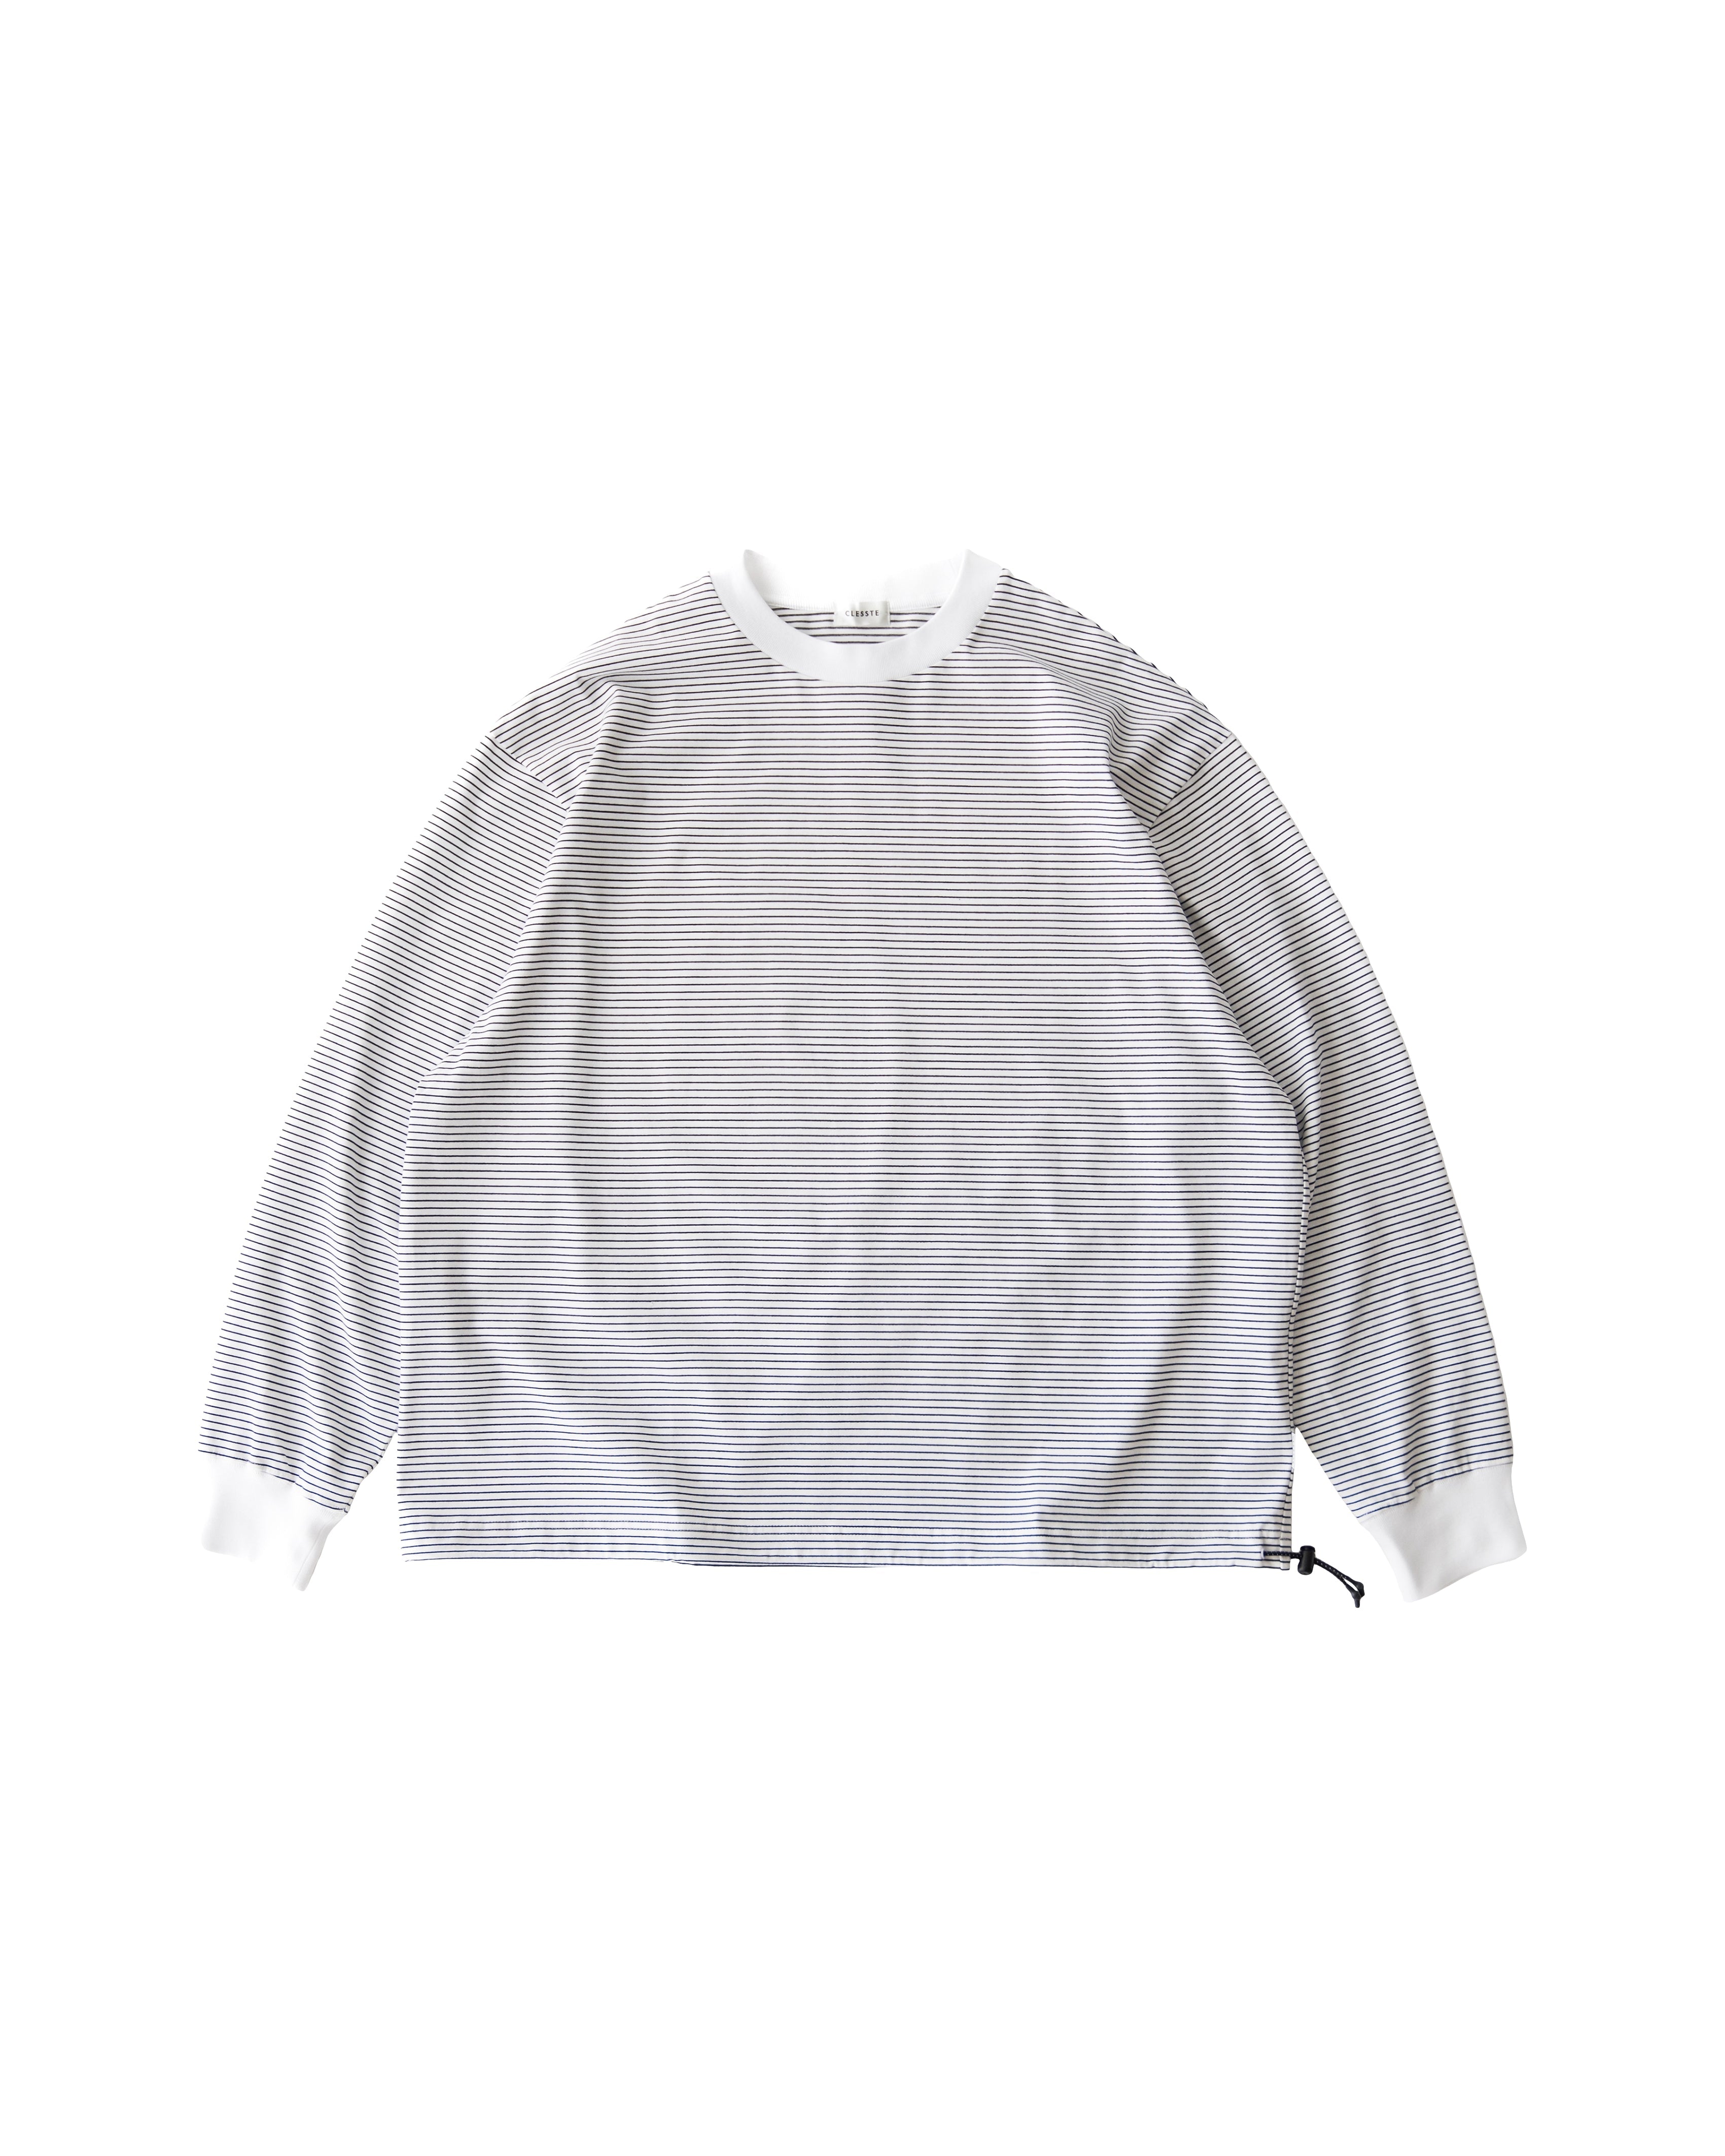 STRIPED MASSIVE L/S T-SHIRT WITH DRAWSTRINGS.